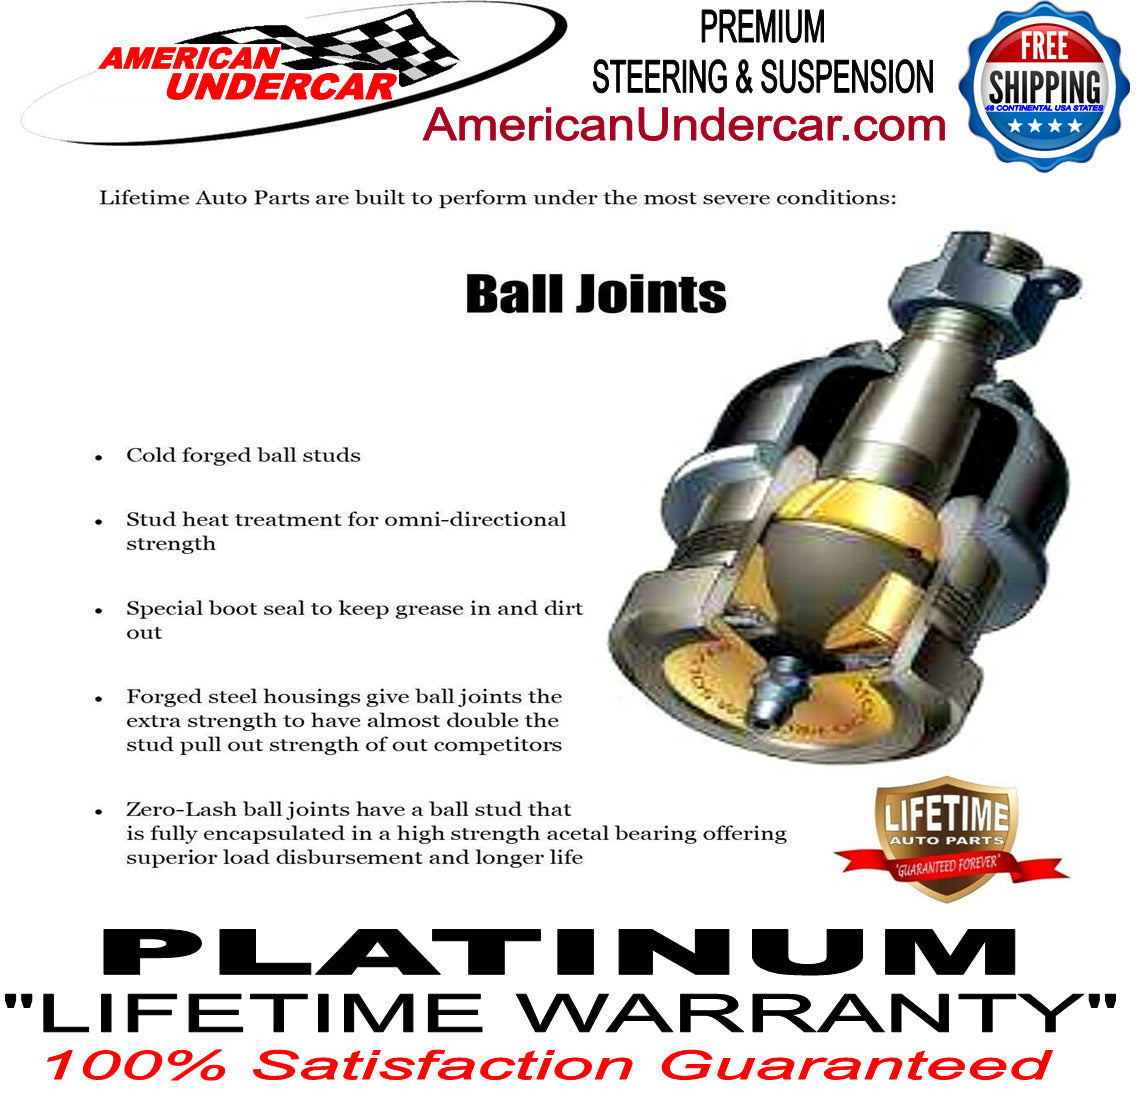 Lifetime Hub Bearing Assembly for 2005-2010 Ford F550 Super Duty 4x4 DRW